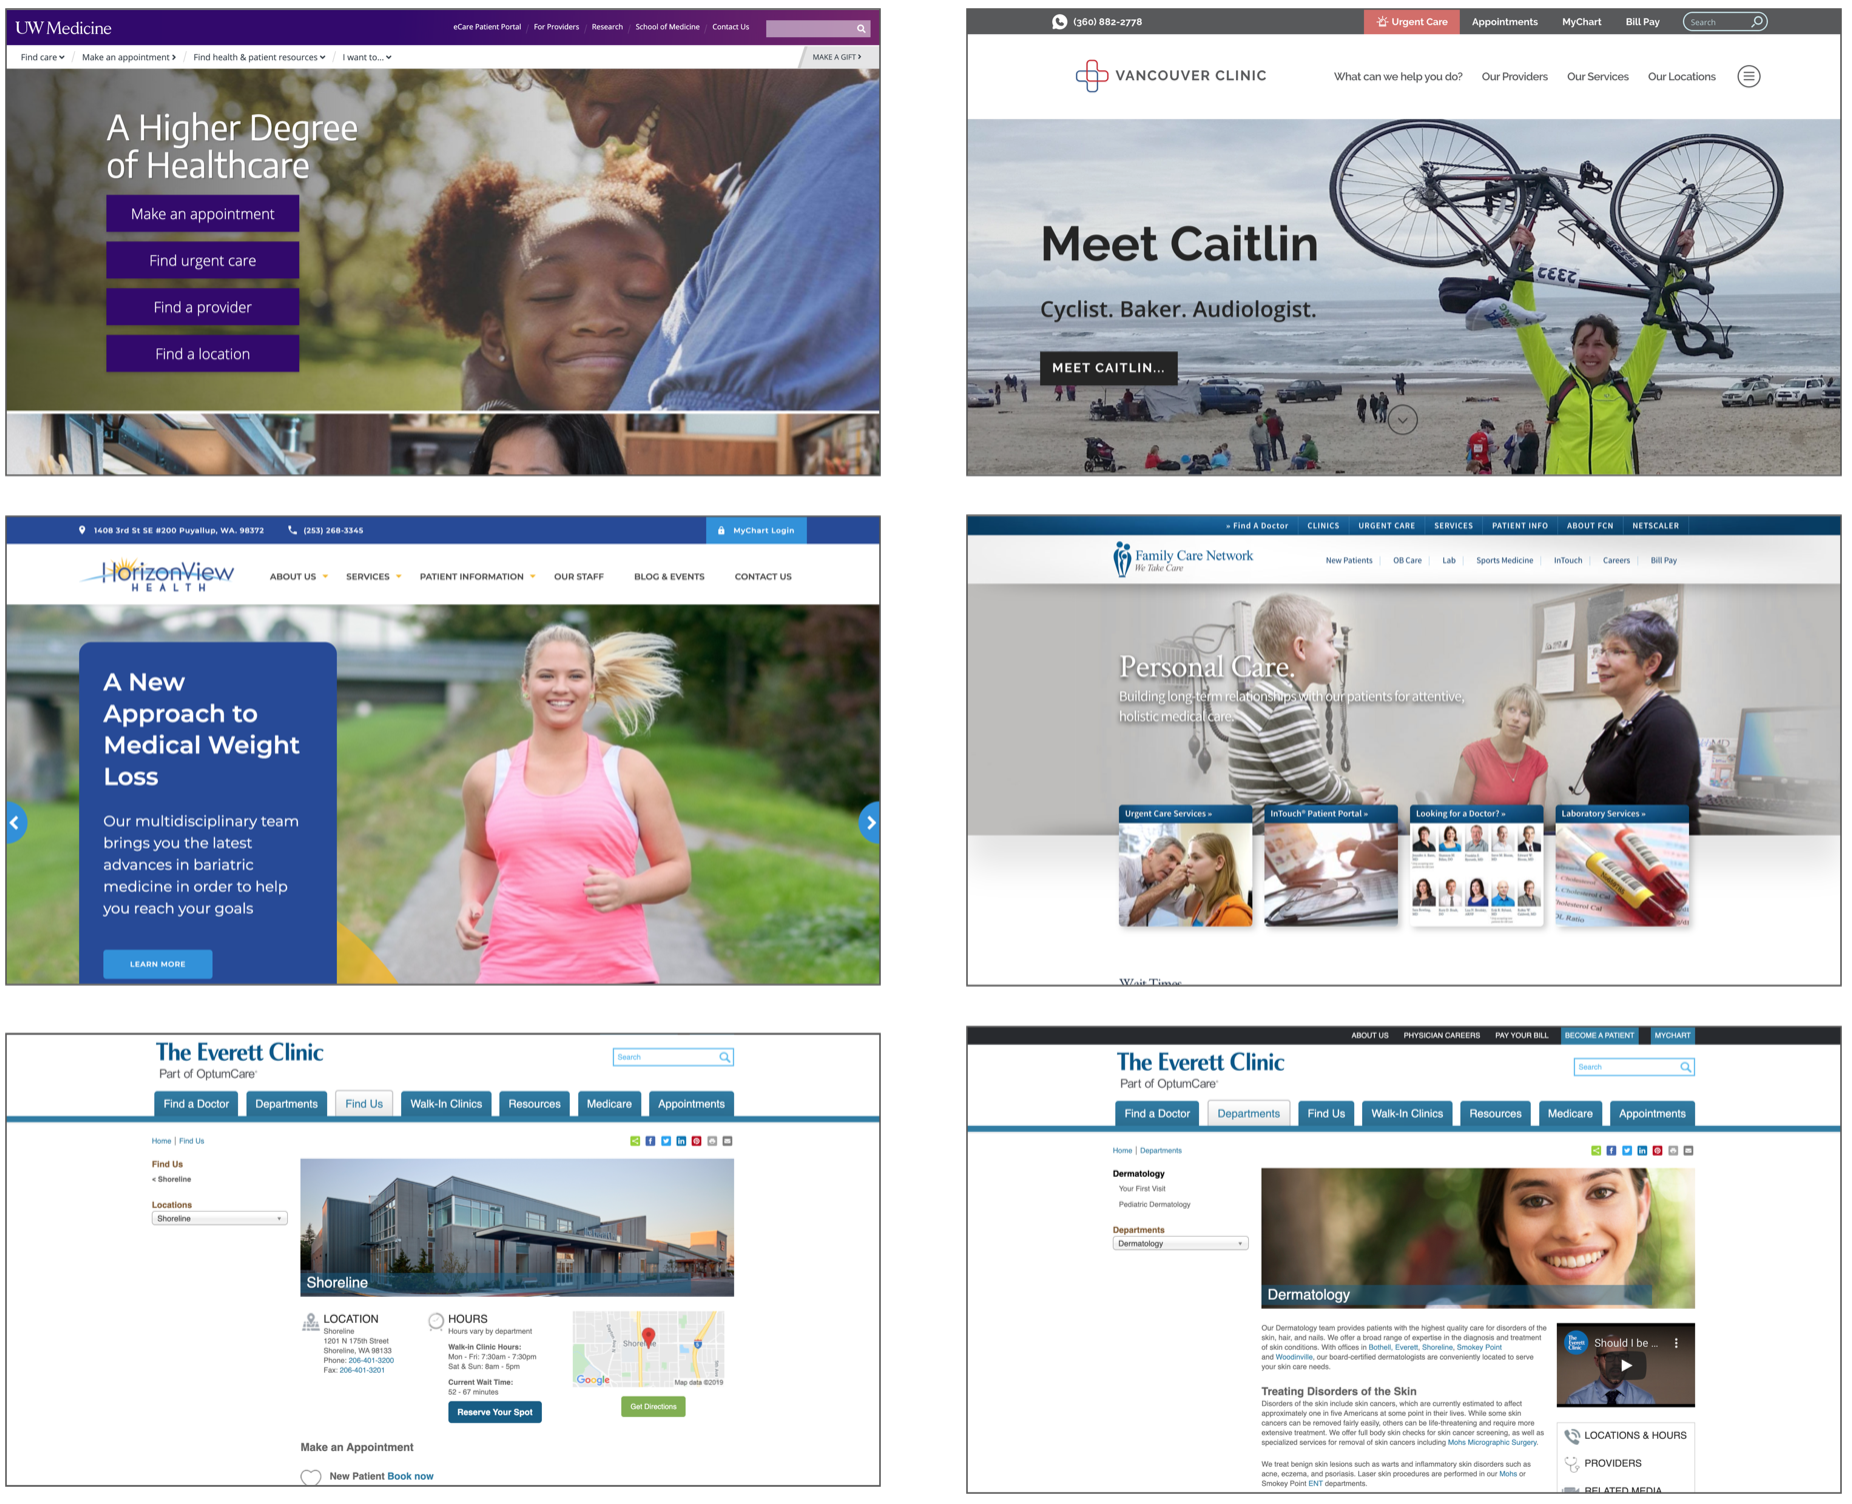 Top left is SFM’s current home page, the other ones are local clinics that are in Washington.